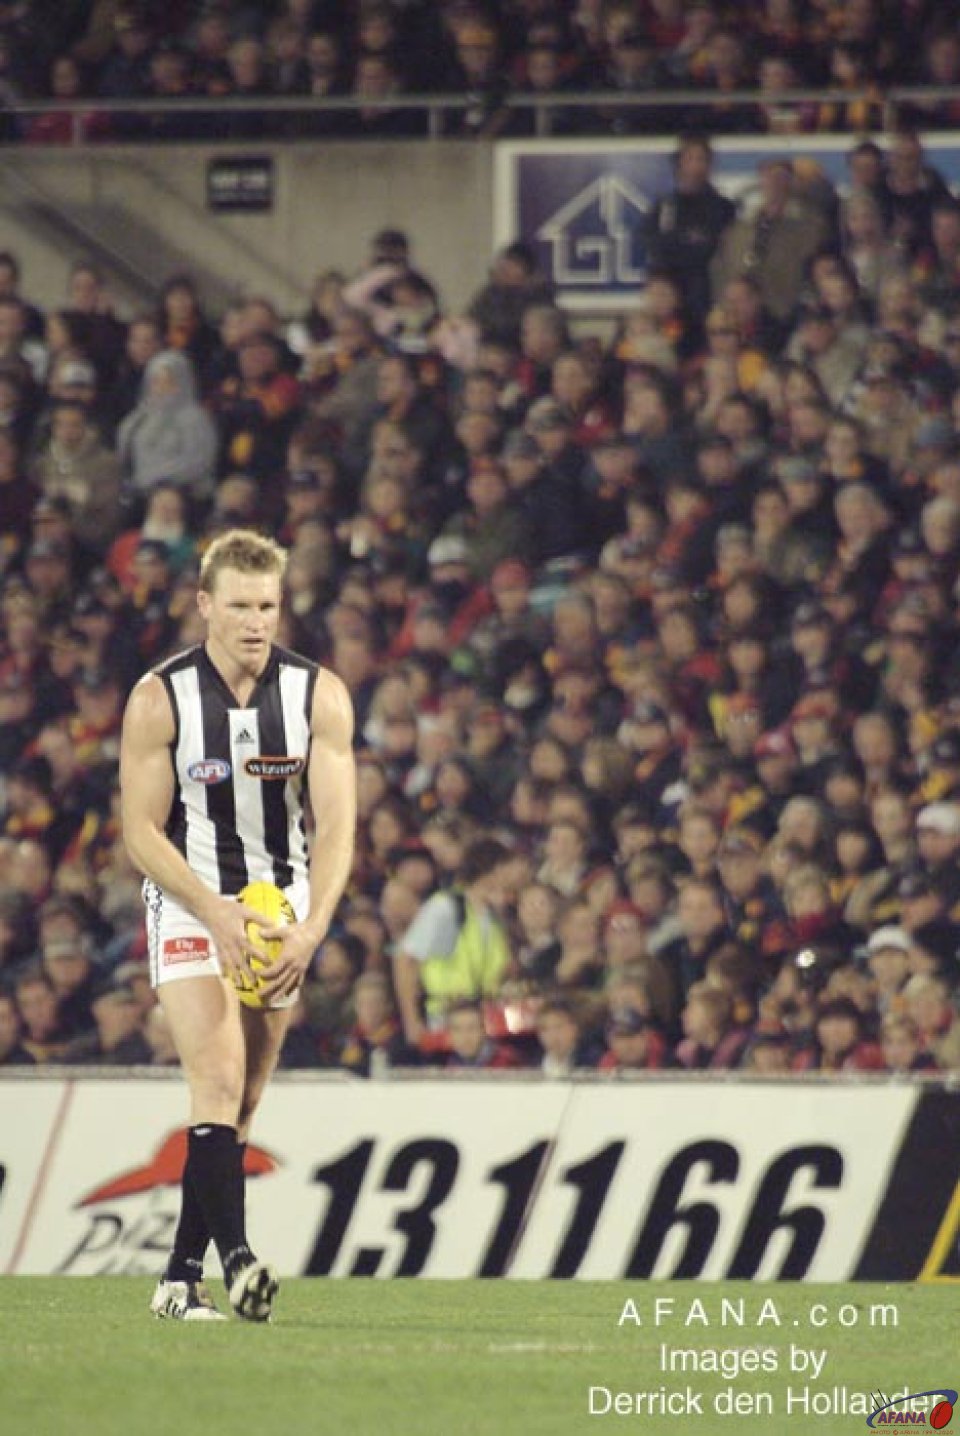 [b]Collingwood captain Nathan Buckley attempts a shot on goal[/b]